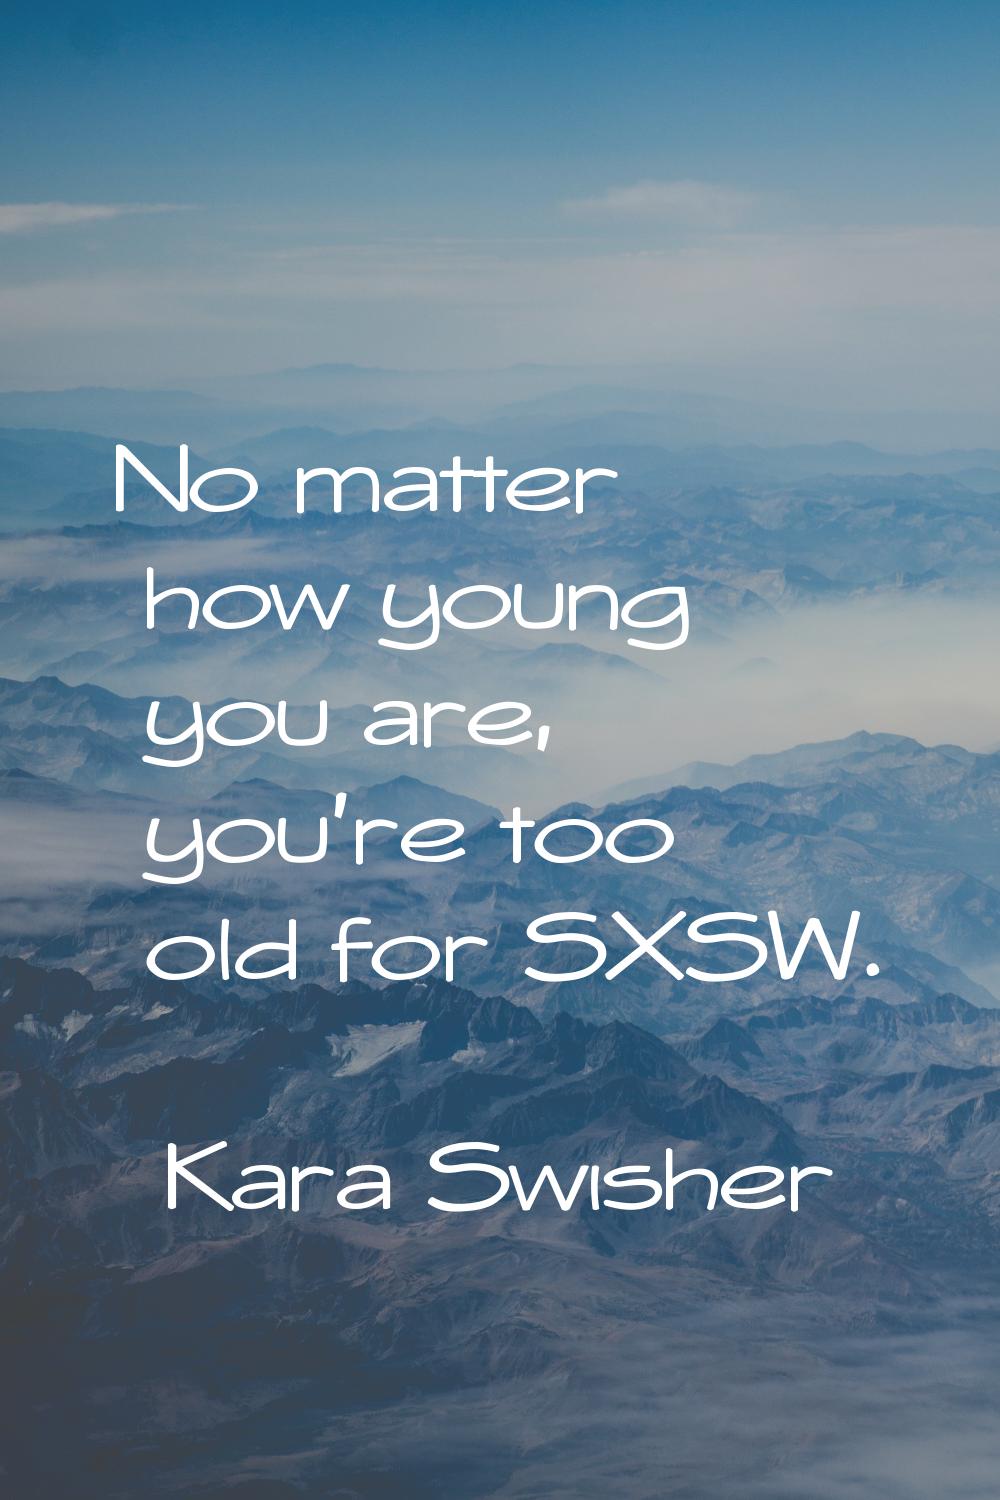 No matter how young you are, you're too old for SXSW.